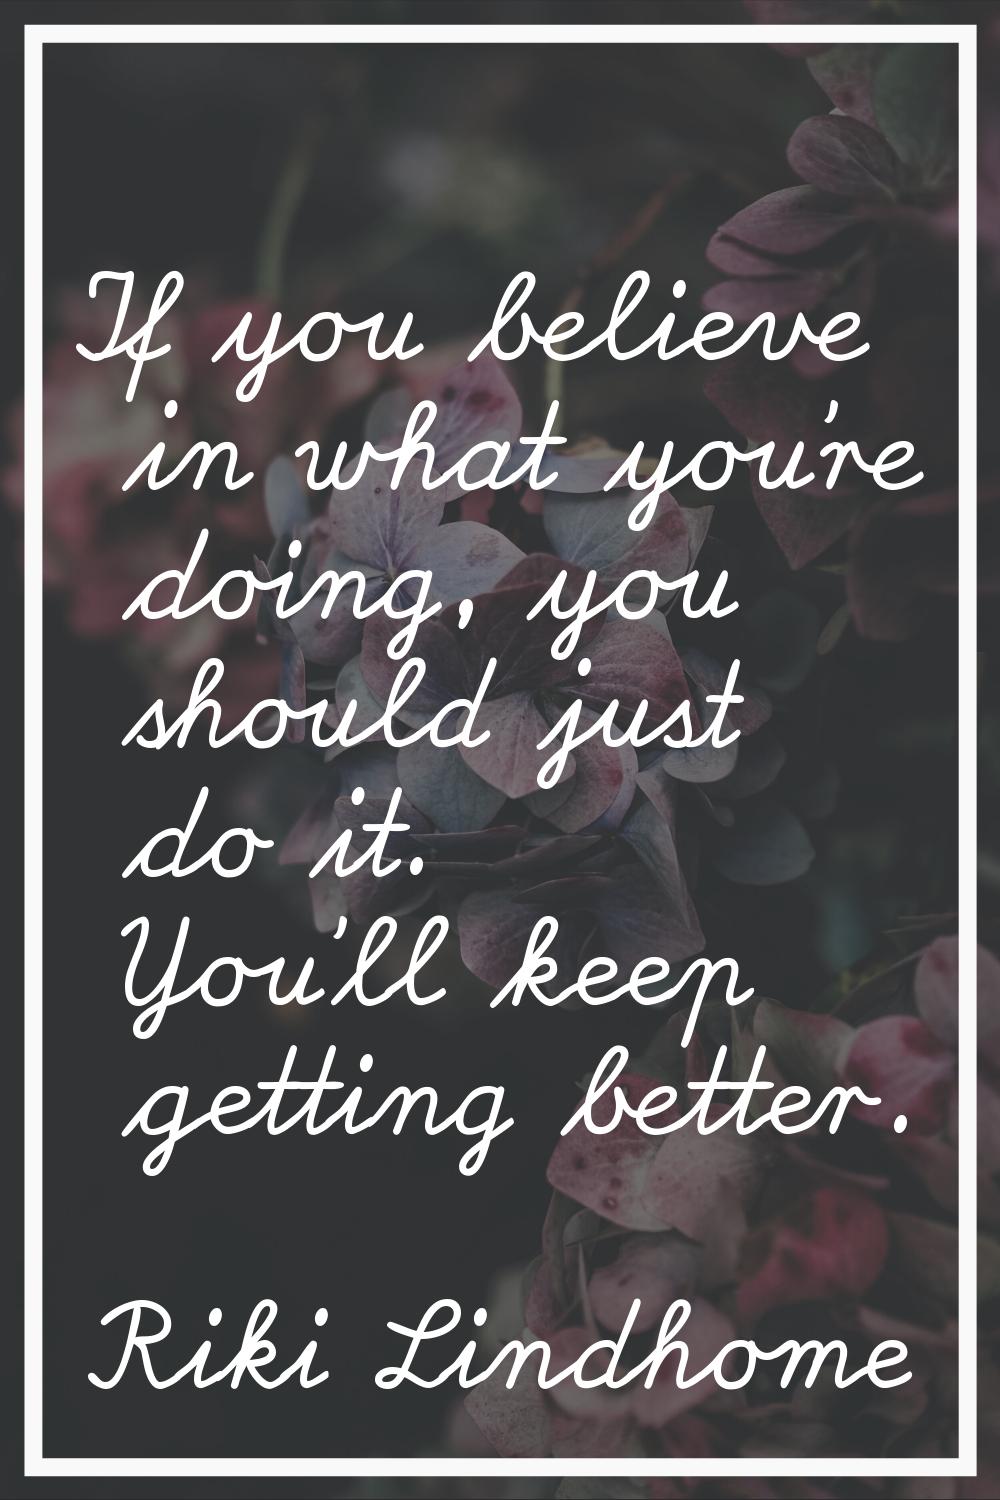 If you believe in what you're doing, you should just do it. You'll keep getting better.